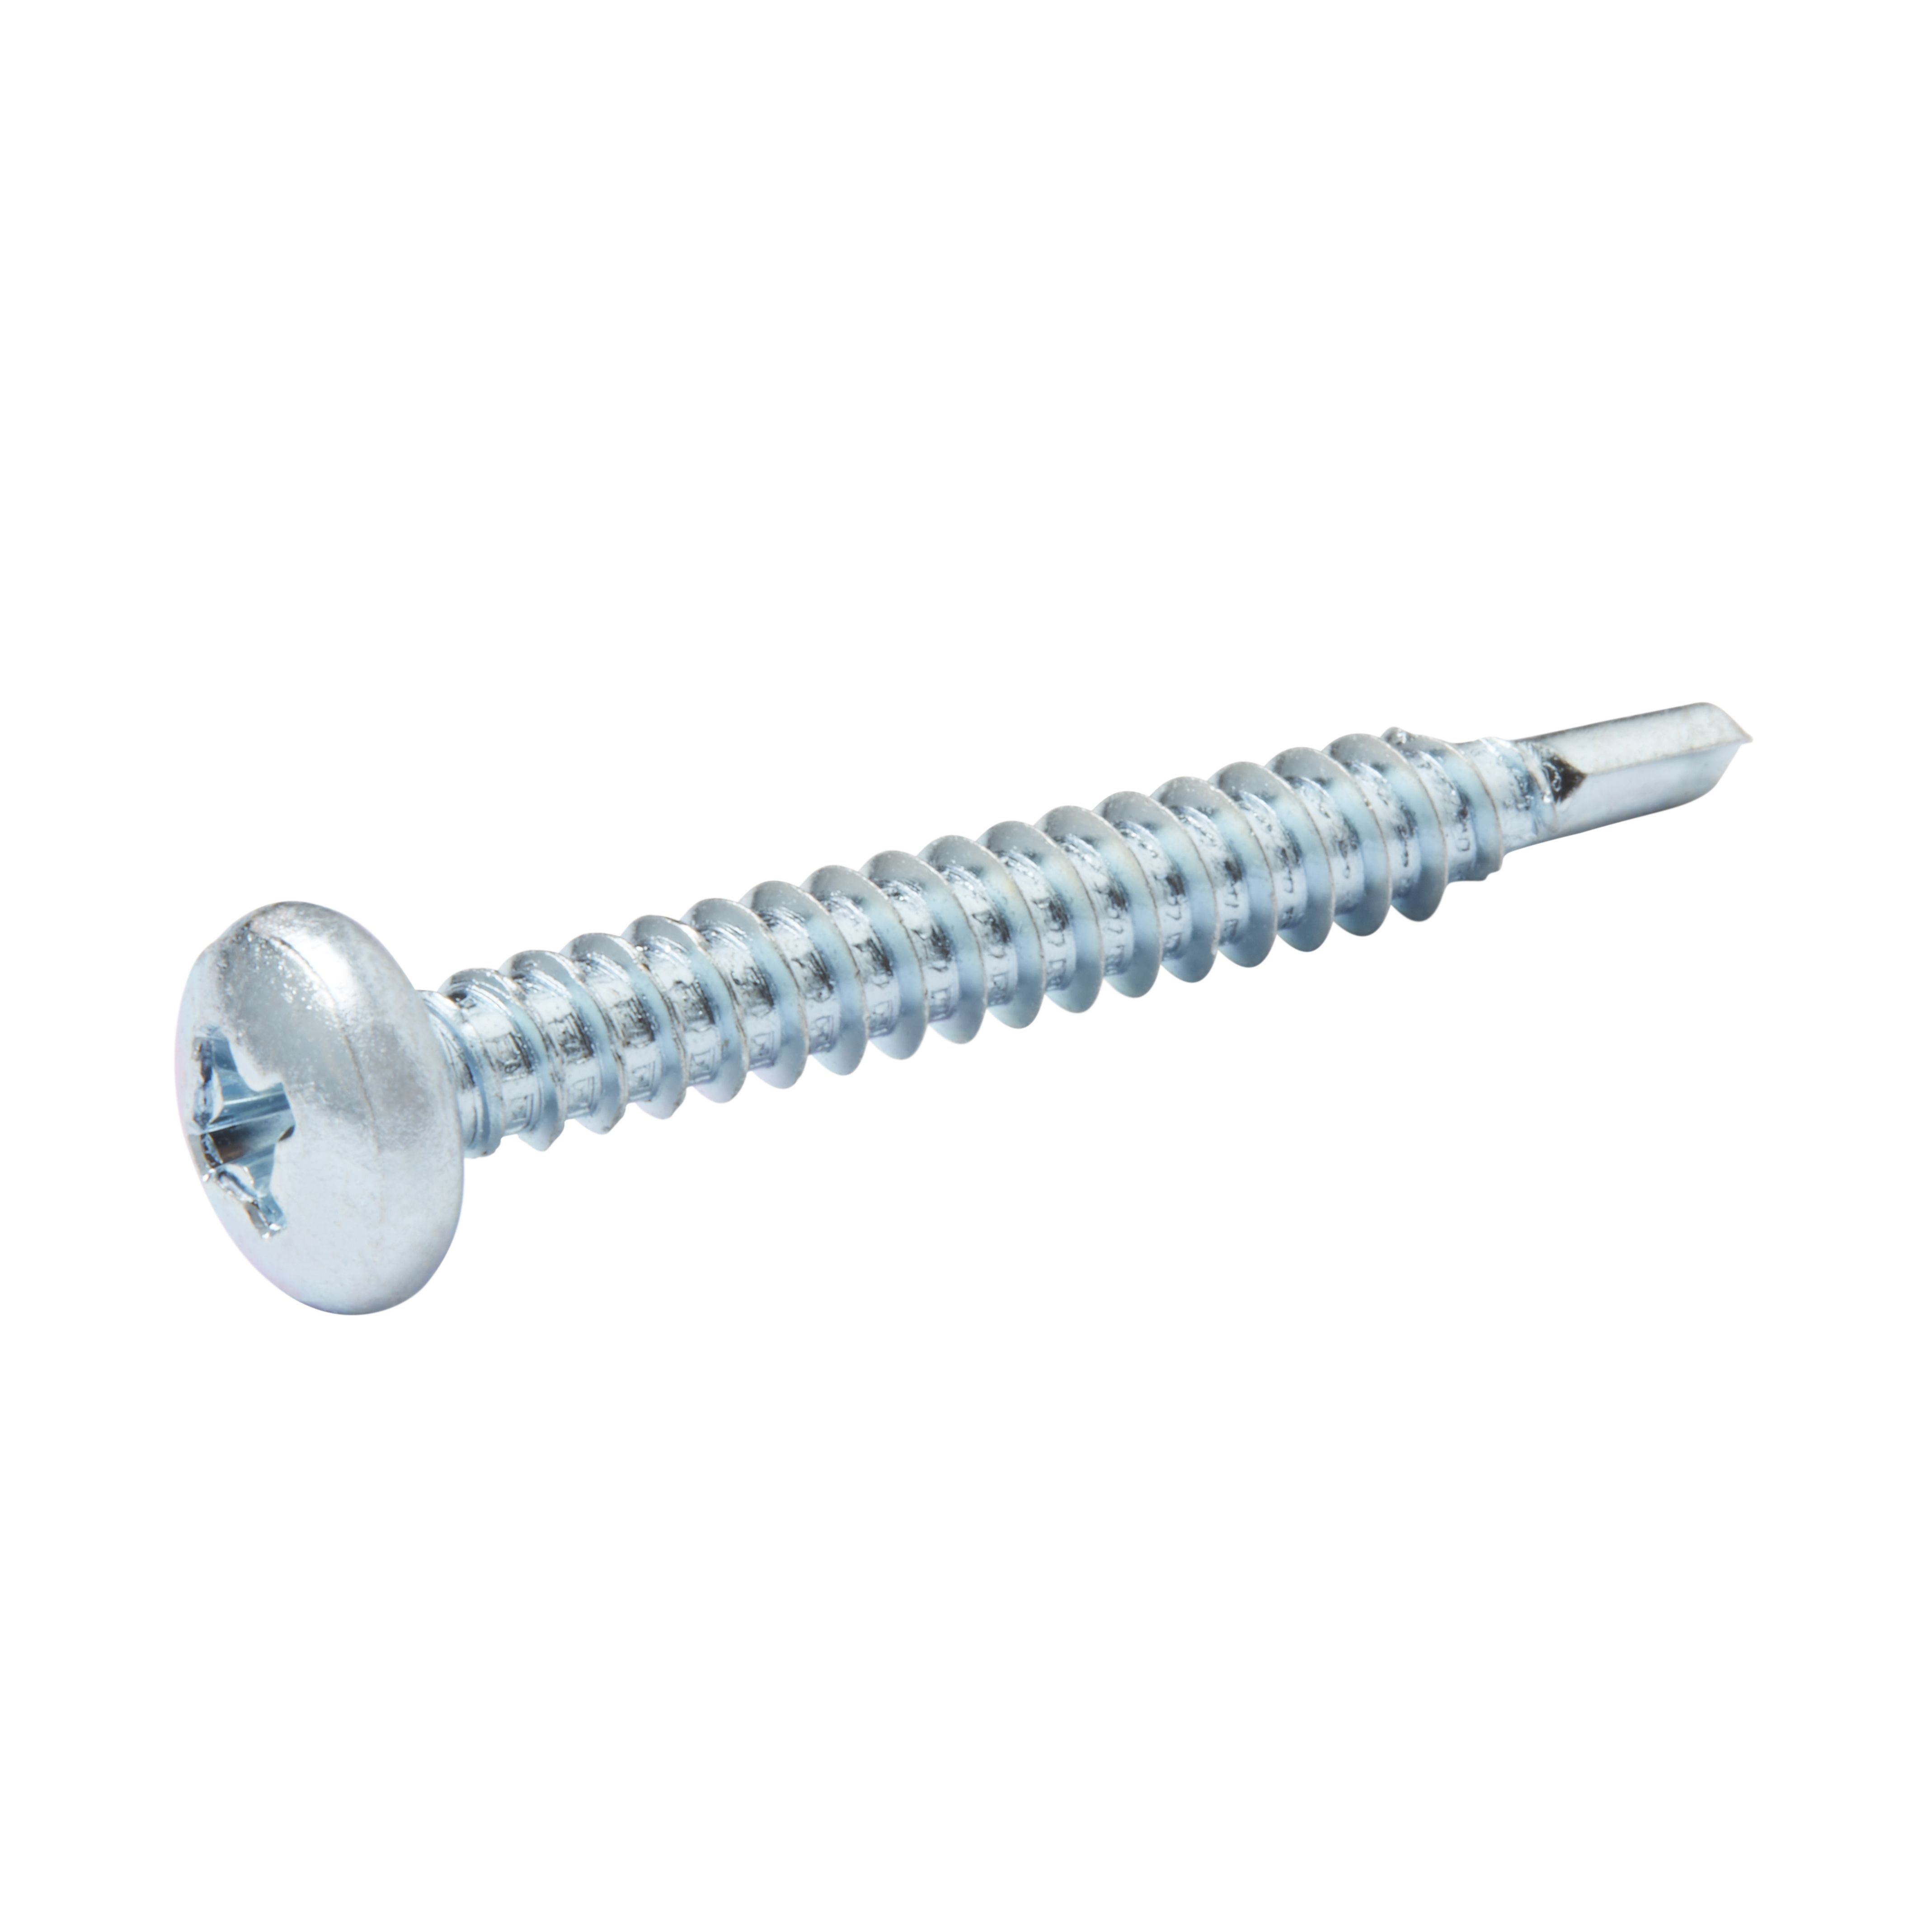 Diall Phillips Pan head Zinc-plated Carbon steel (C1022) Self-drilling screw (Dia)4.8mm (L)38mm, Pack of 25